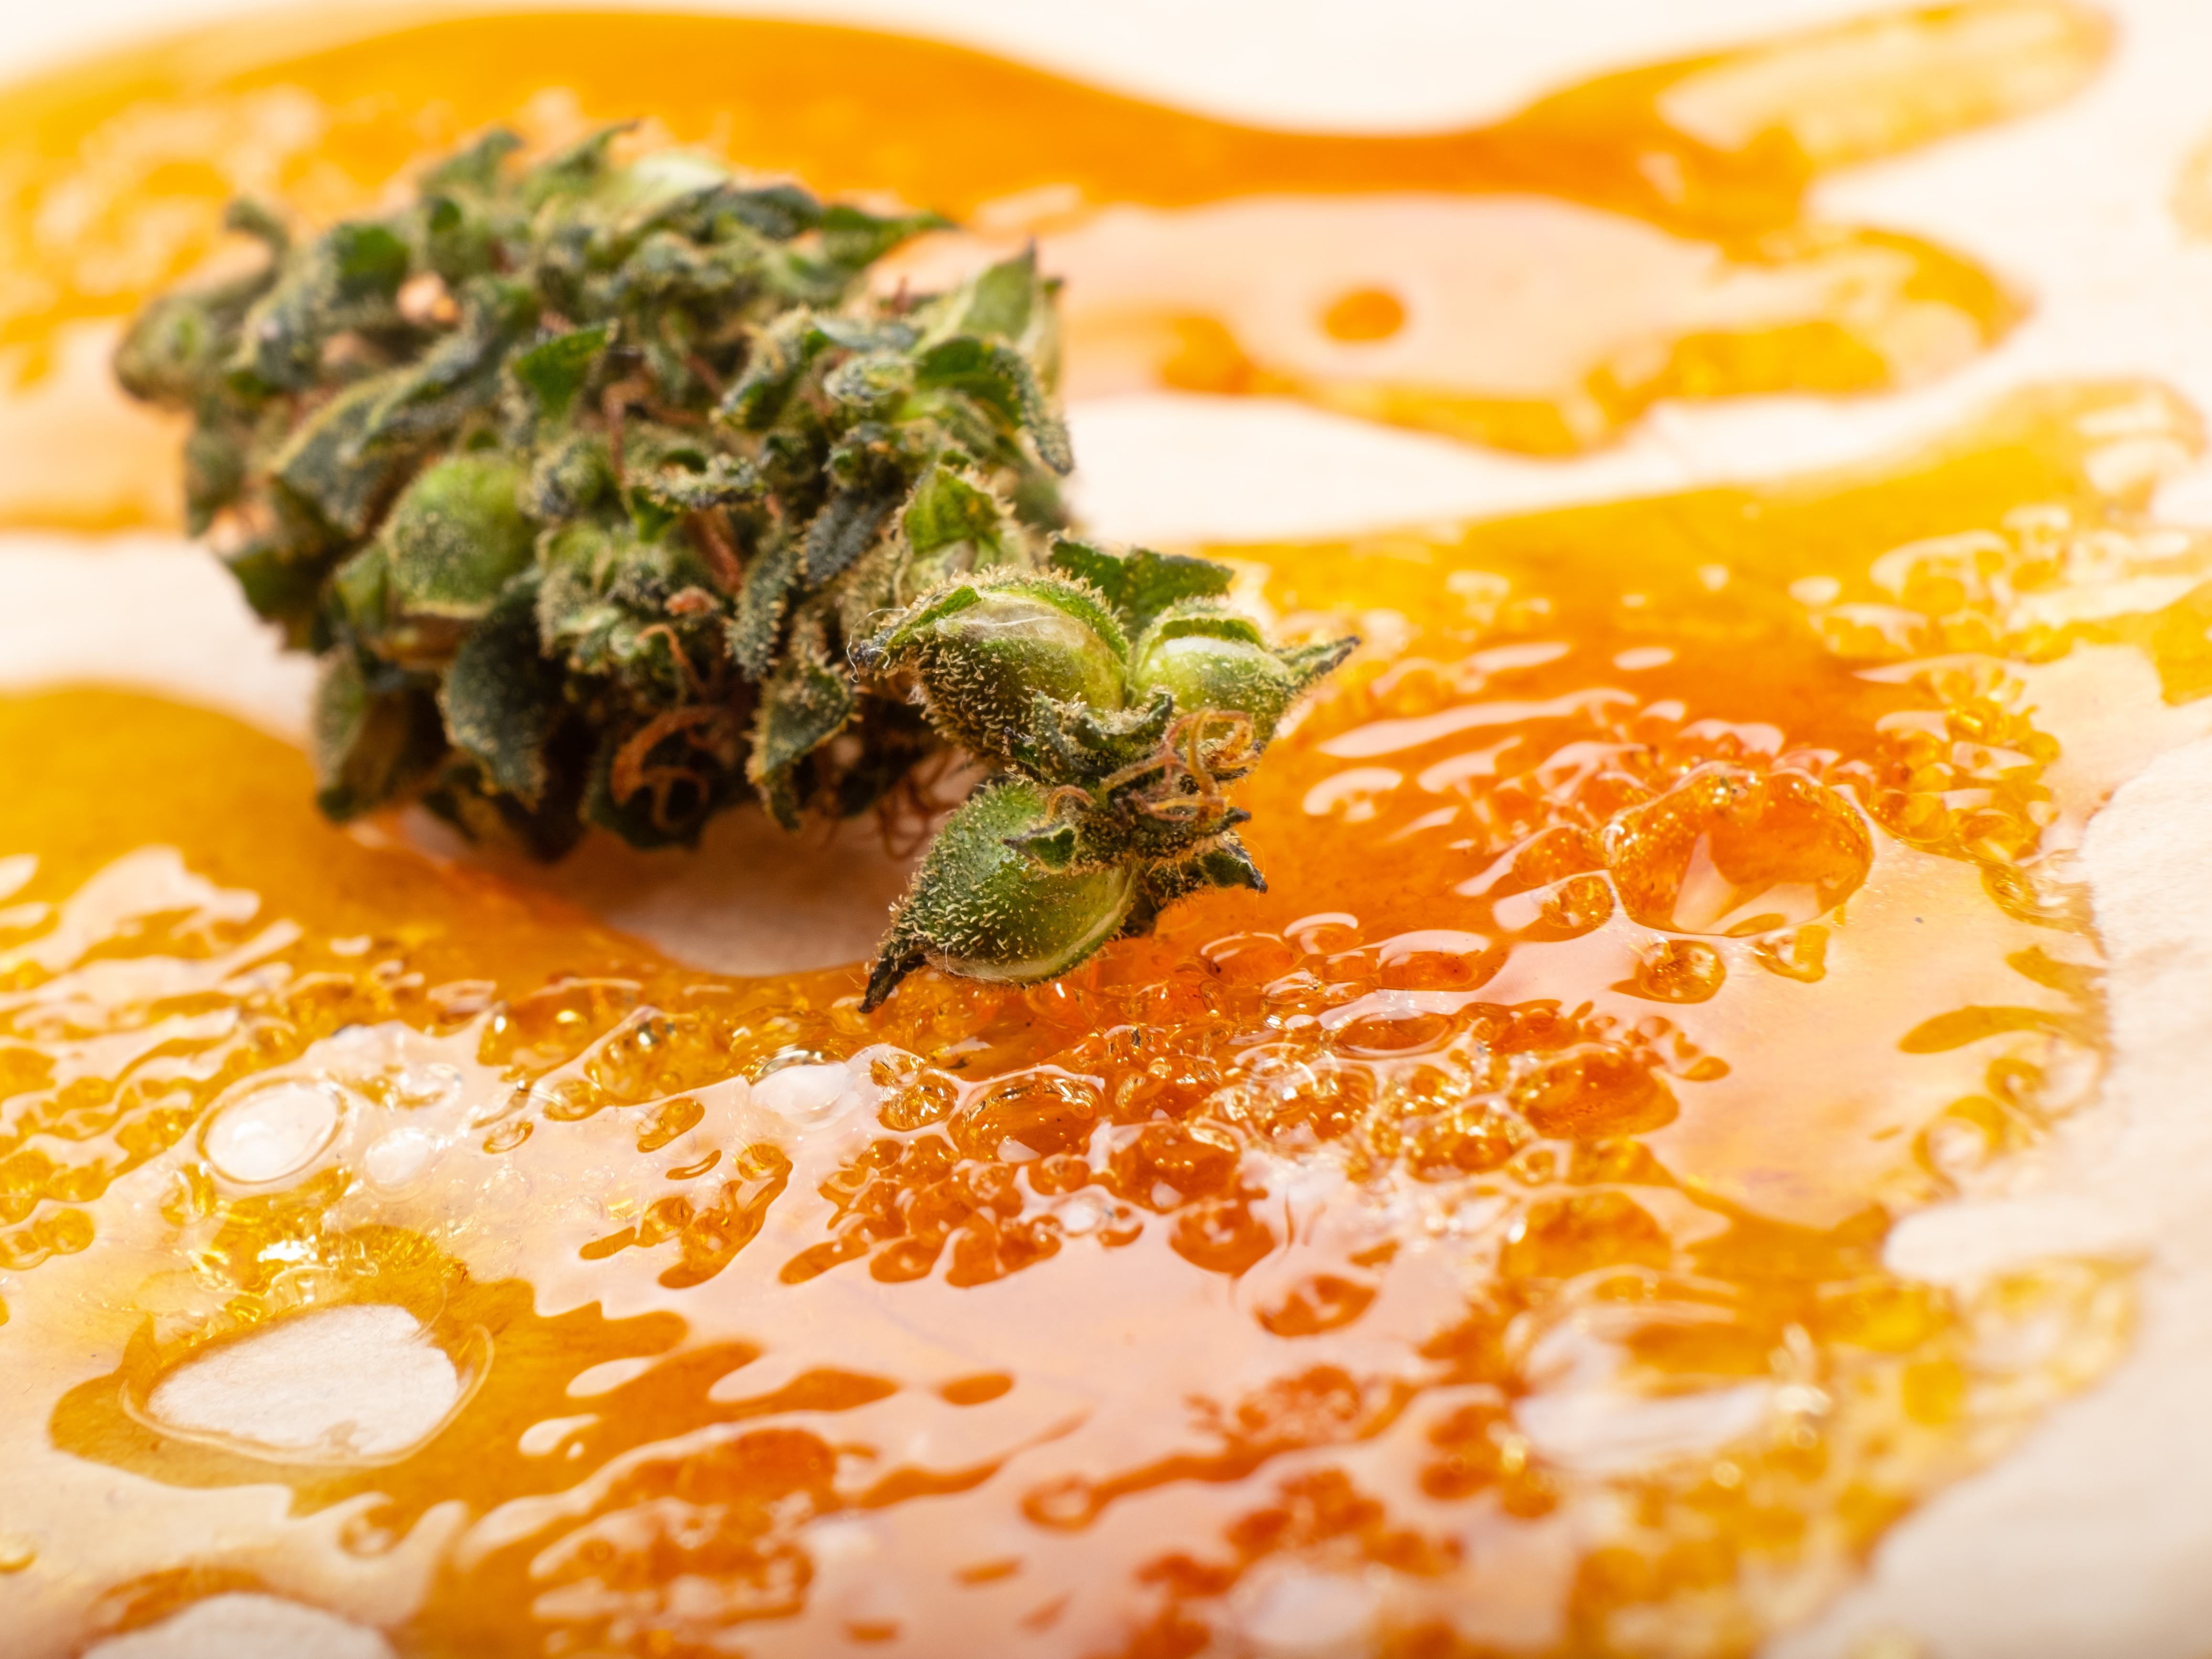 Rosin vs. Resin - What's the Difference?